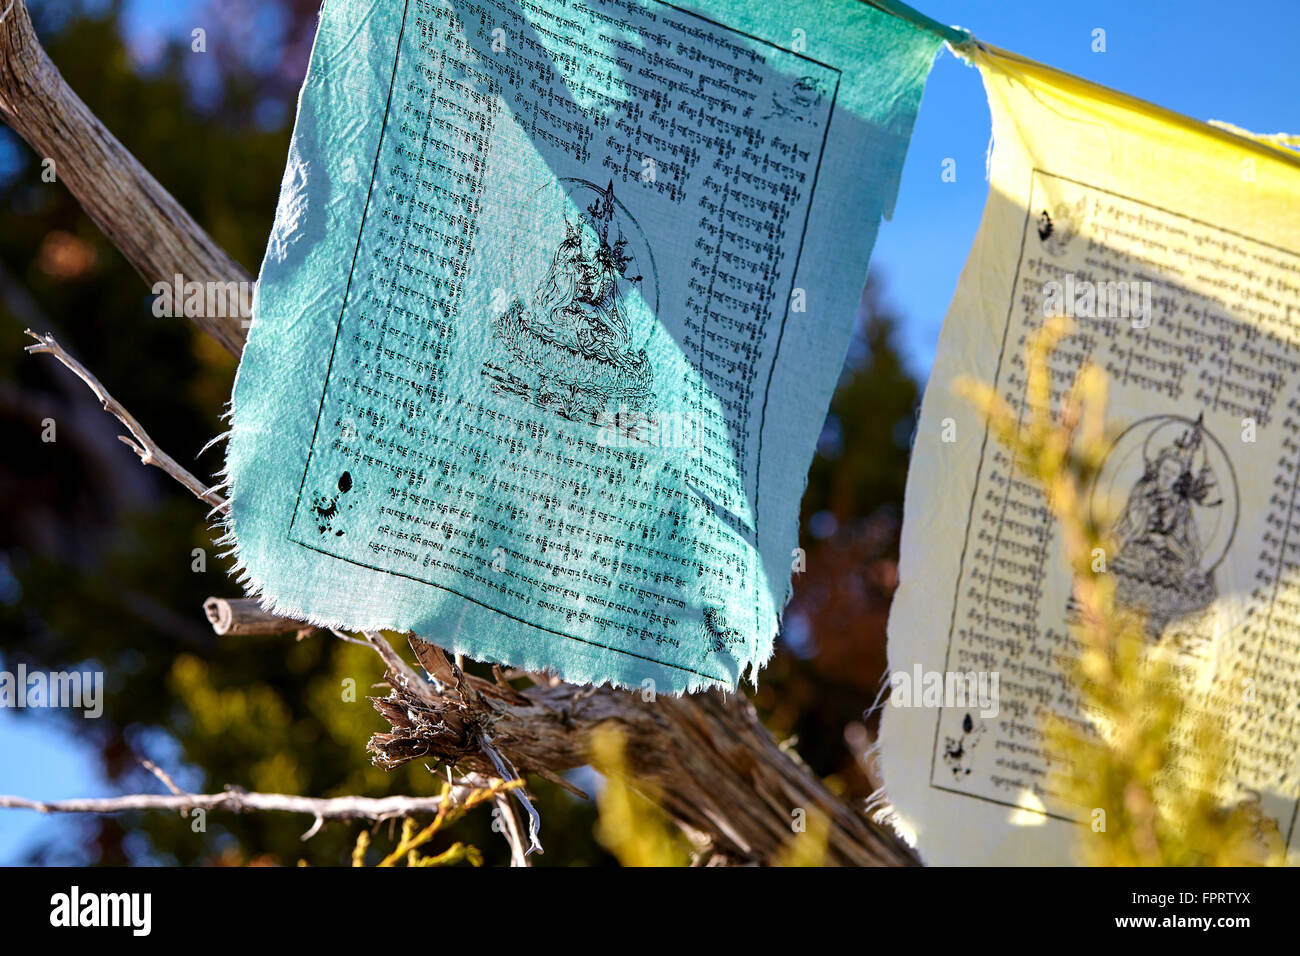 traditional buddhist prayer flags on mountain pine trees in the wind Stock Photo